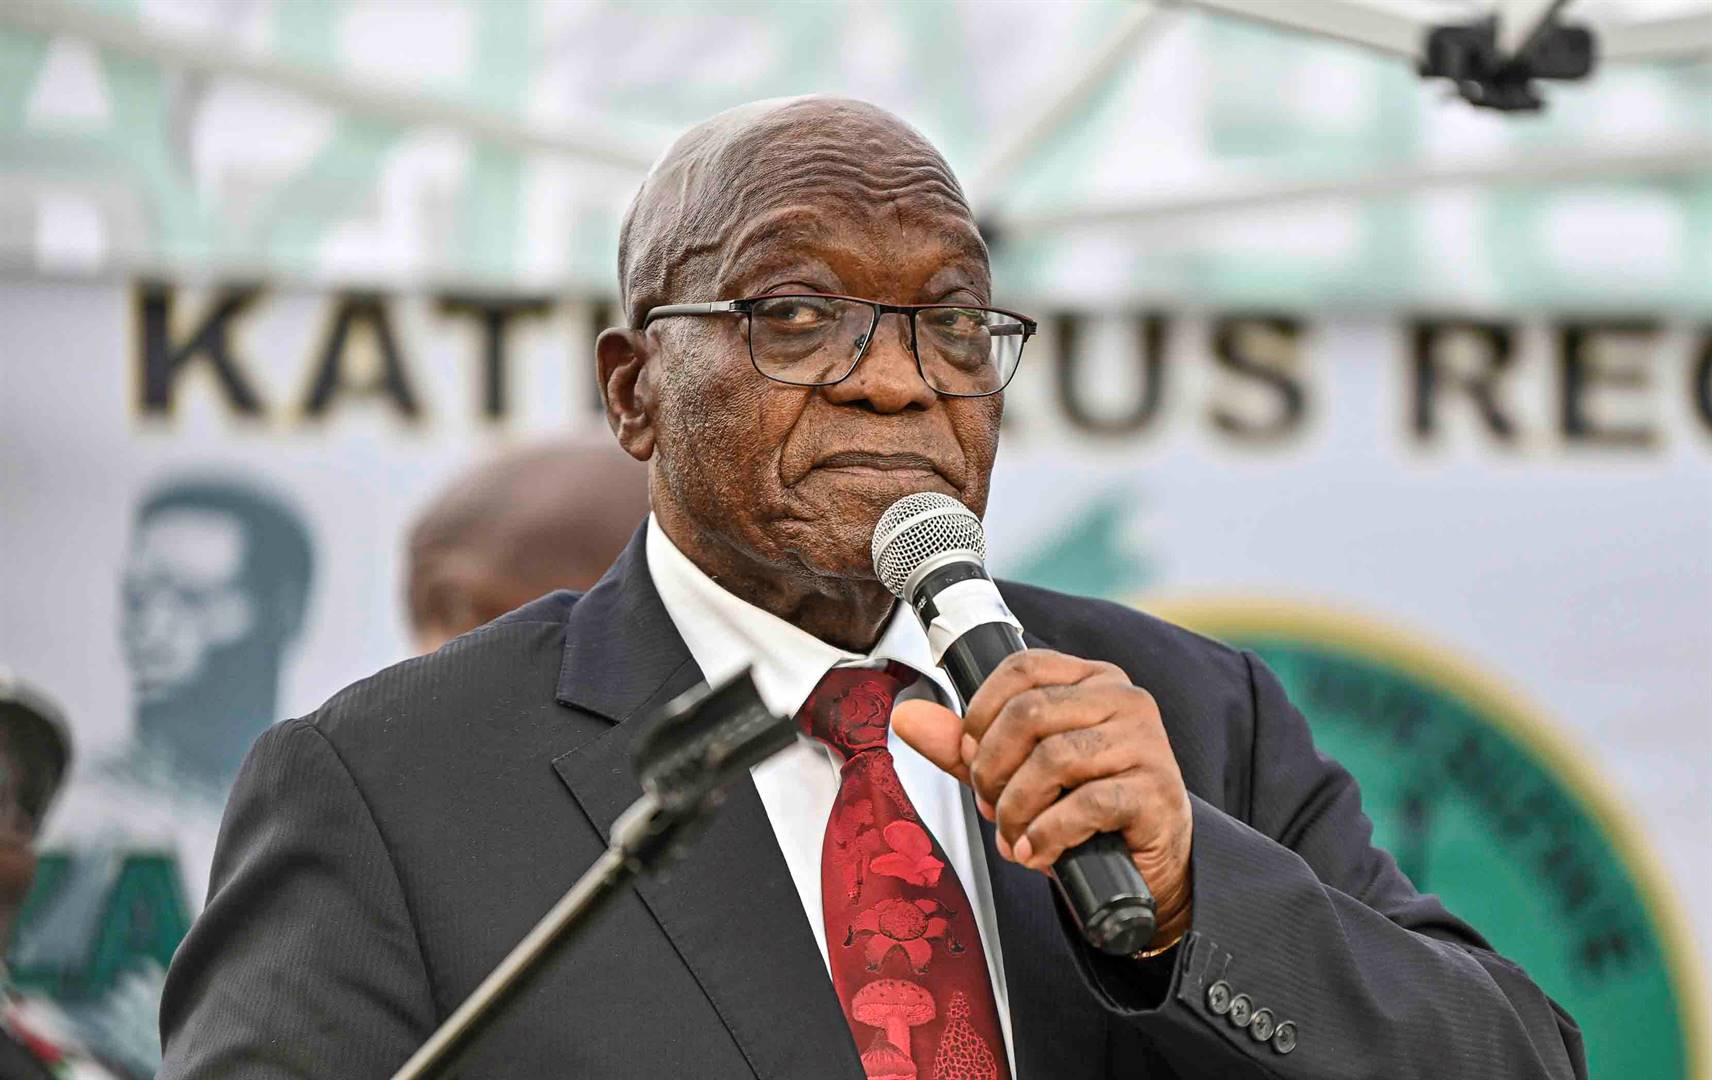 News24 | ConCourt grants Zuma's request for extension to file papers in his election candidacy case